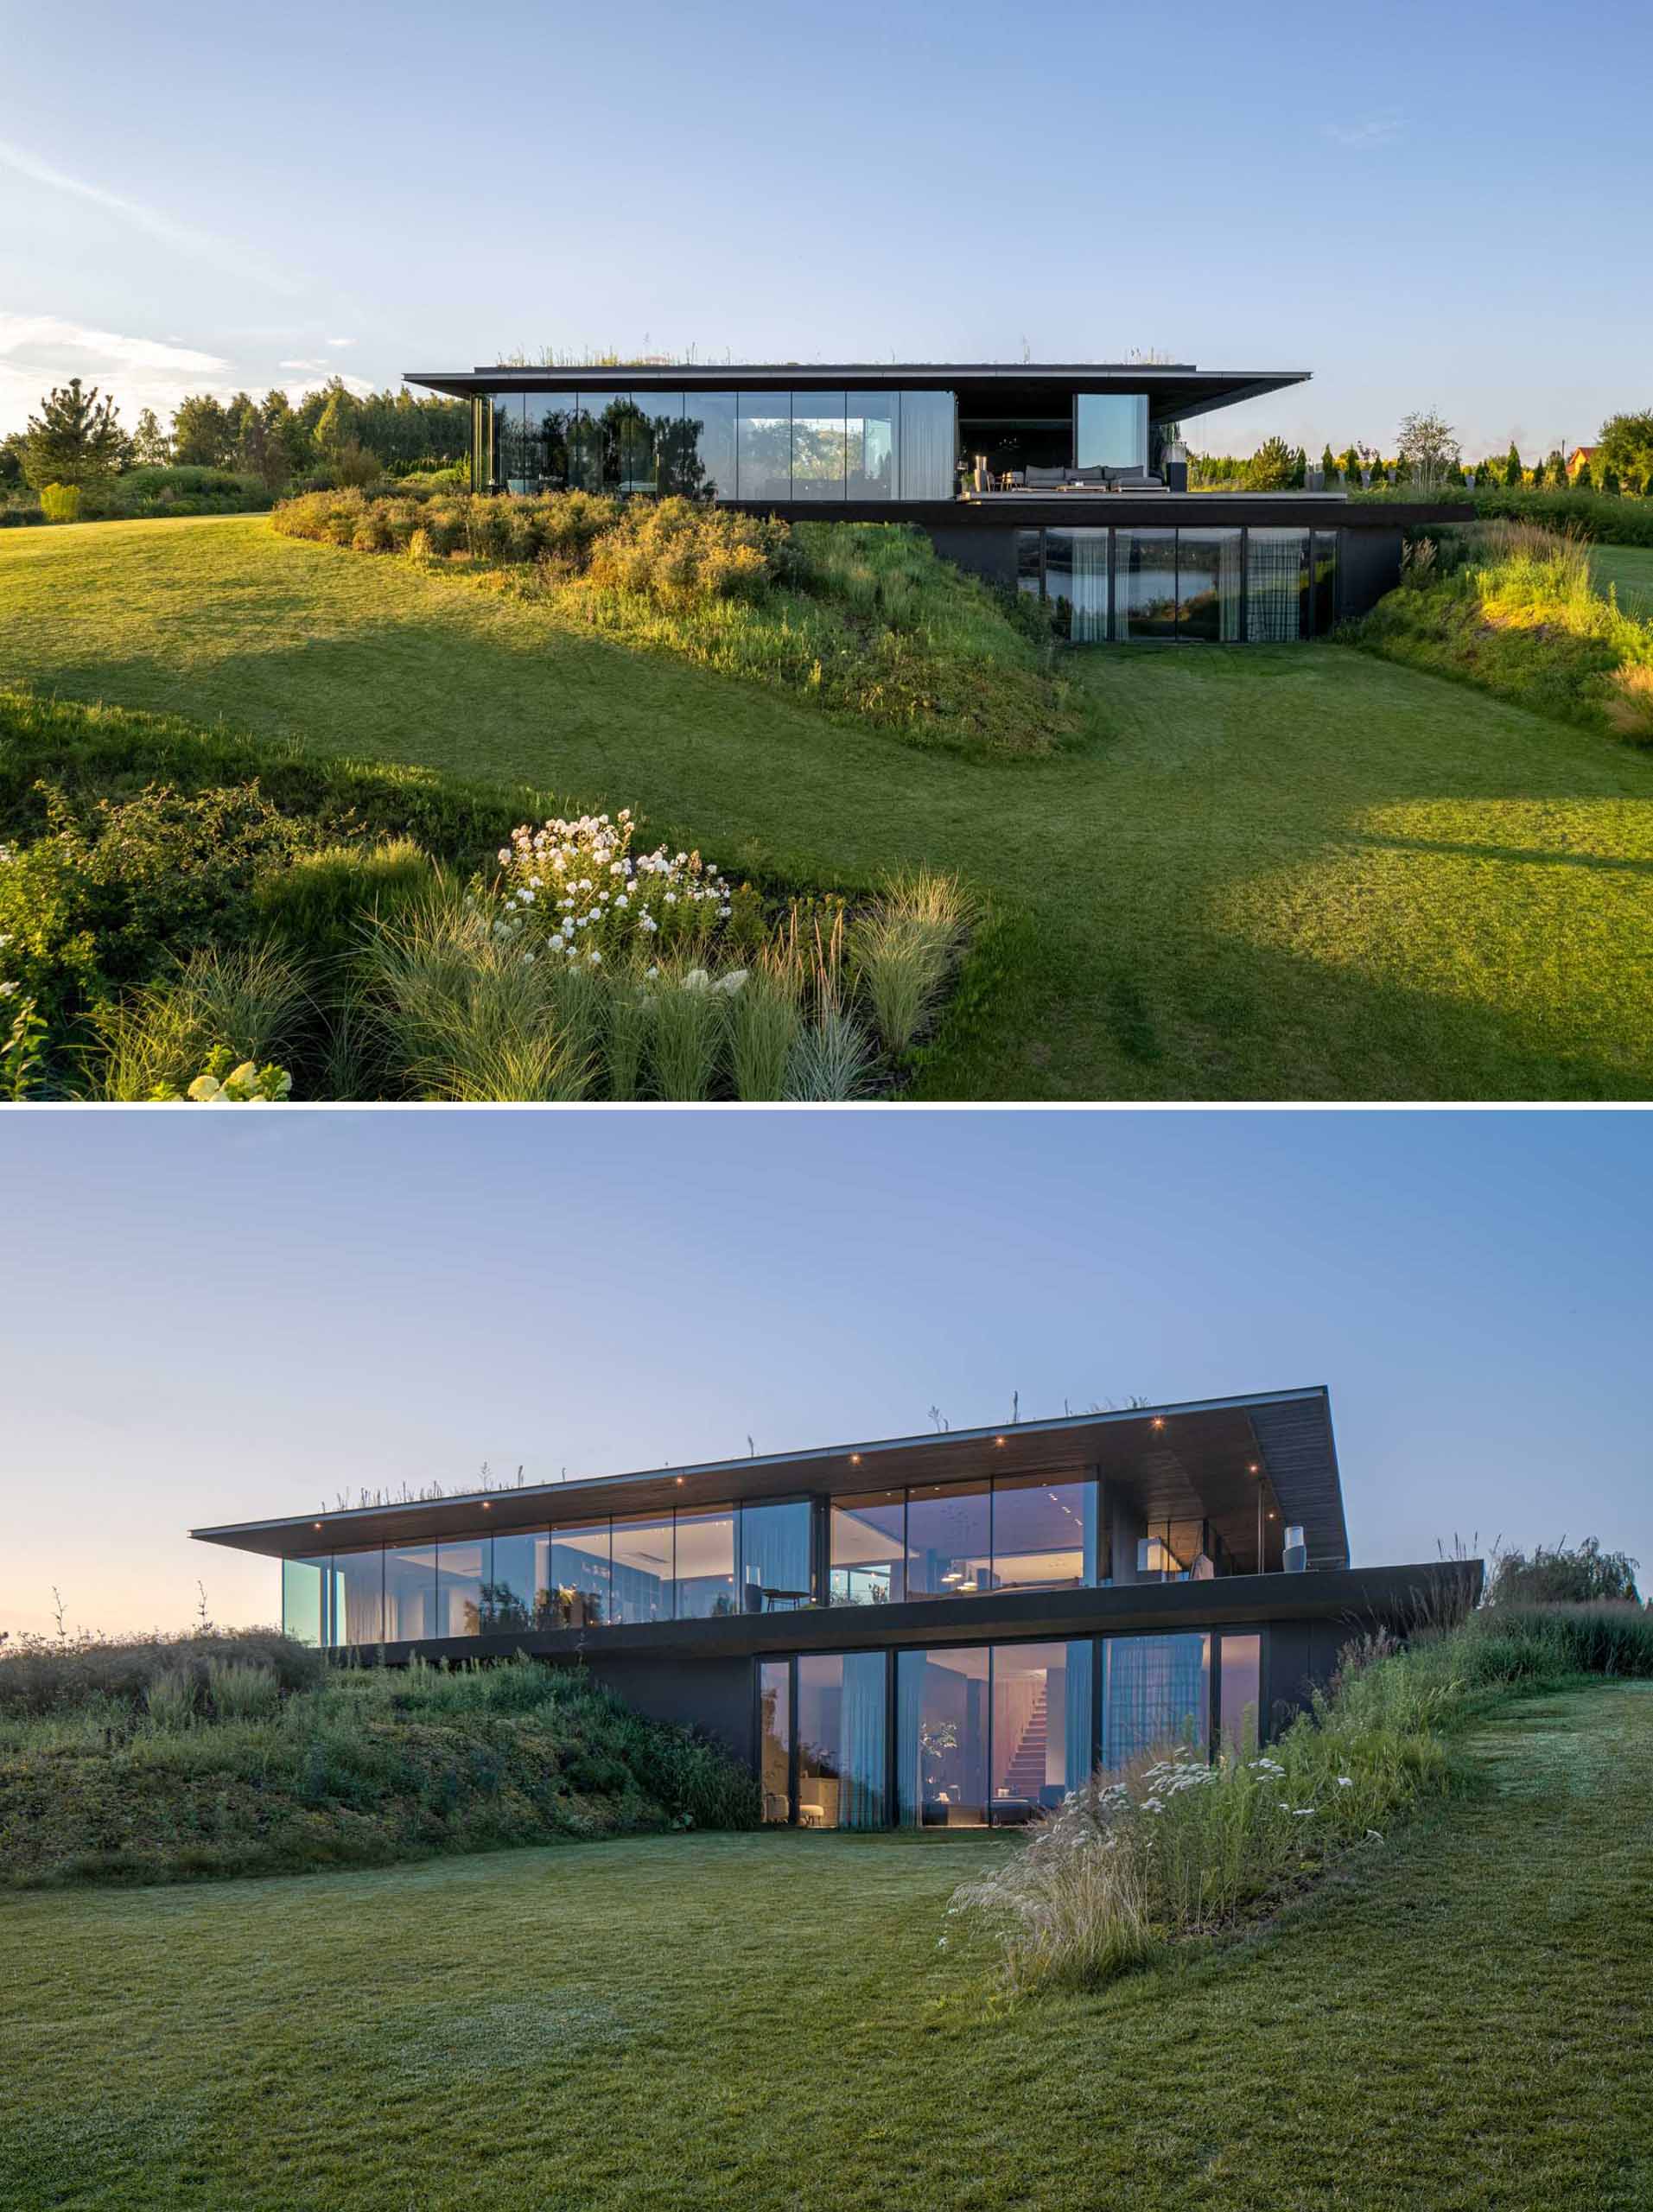 A modern house is nestled into the landscape, with a lower floor having direct access to the yard.